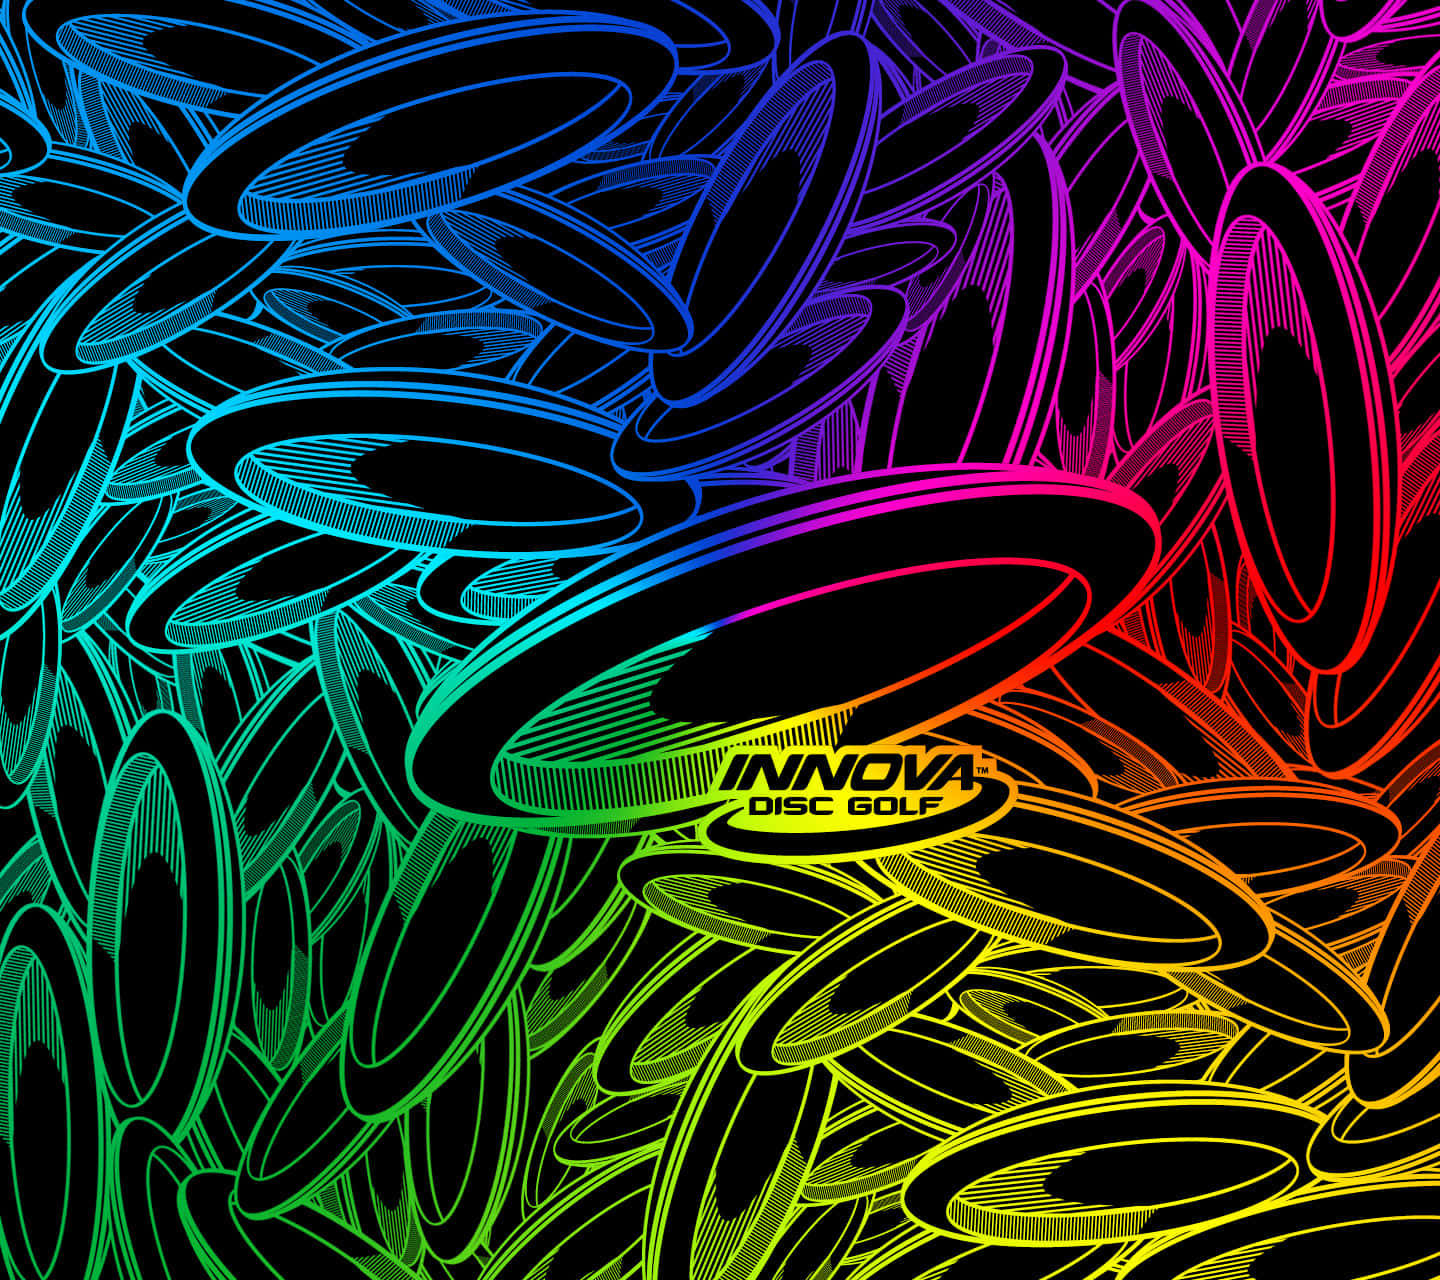 Multicolored Innova Disc Golf Best Ultimate Frisbee Background